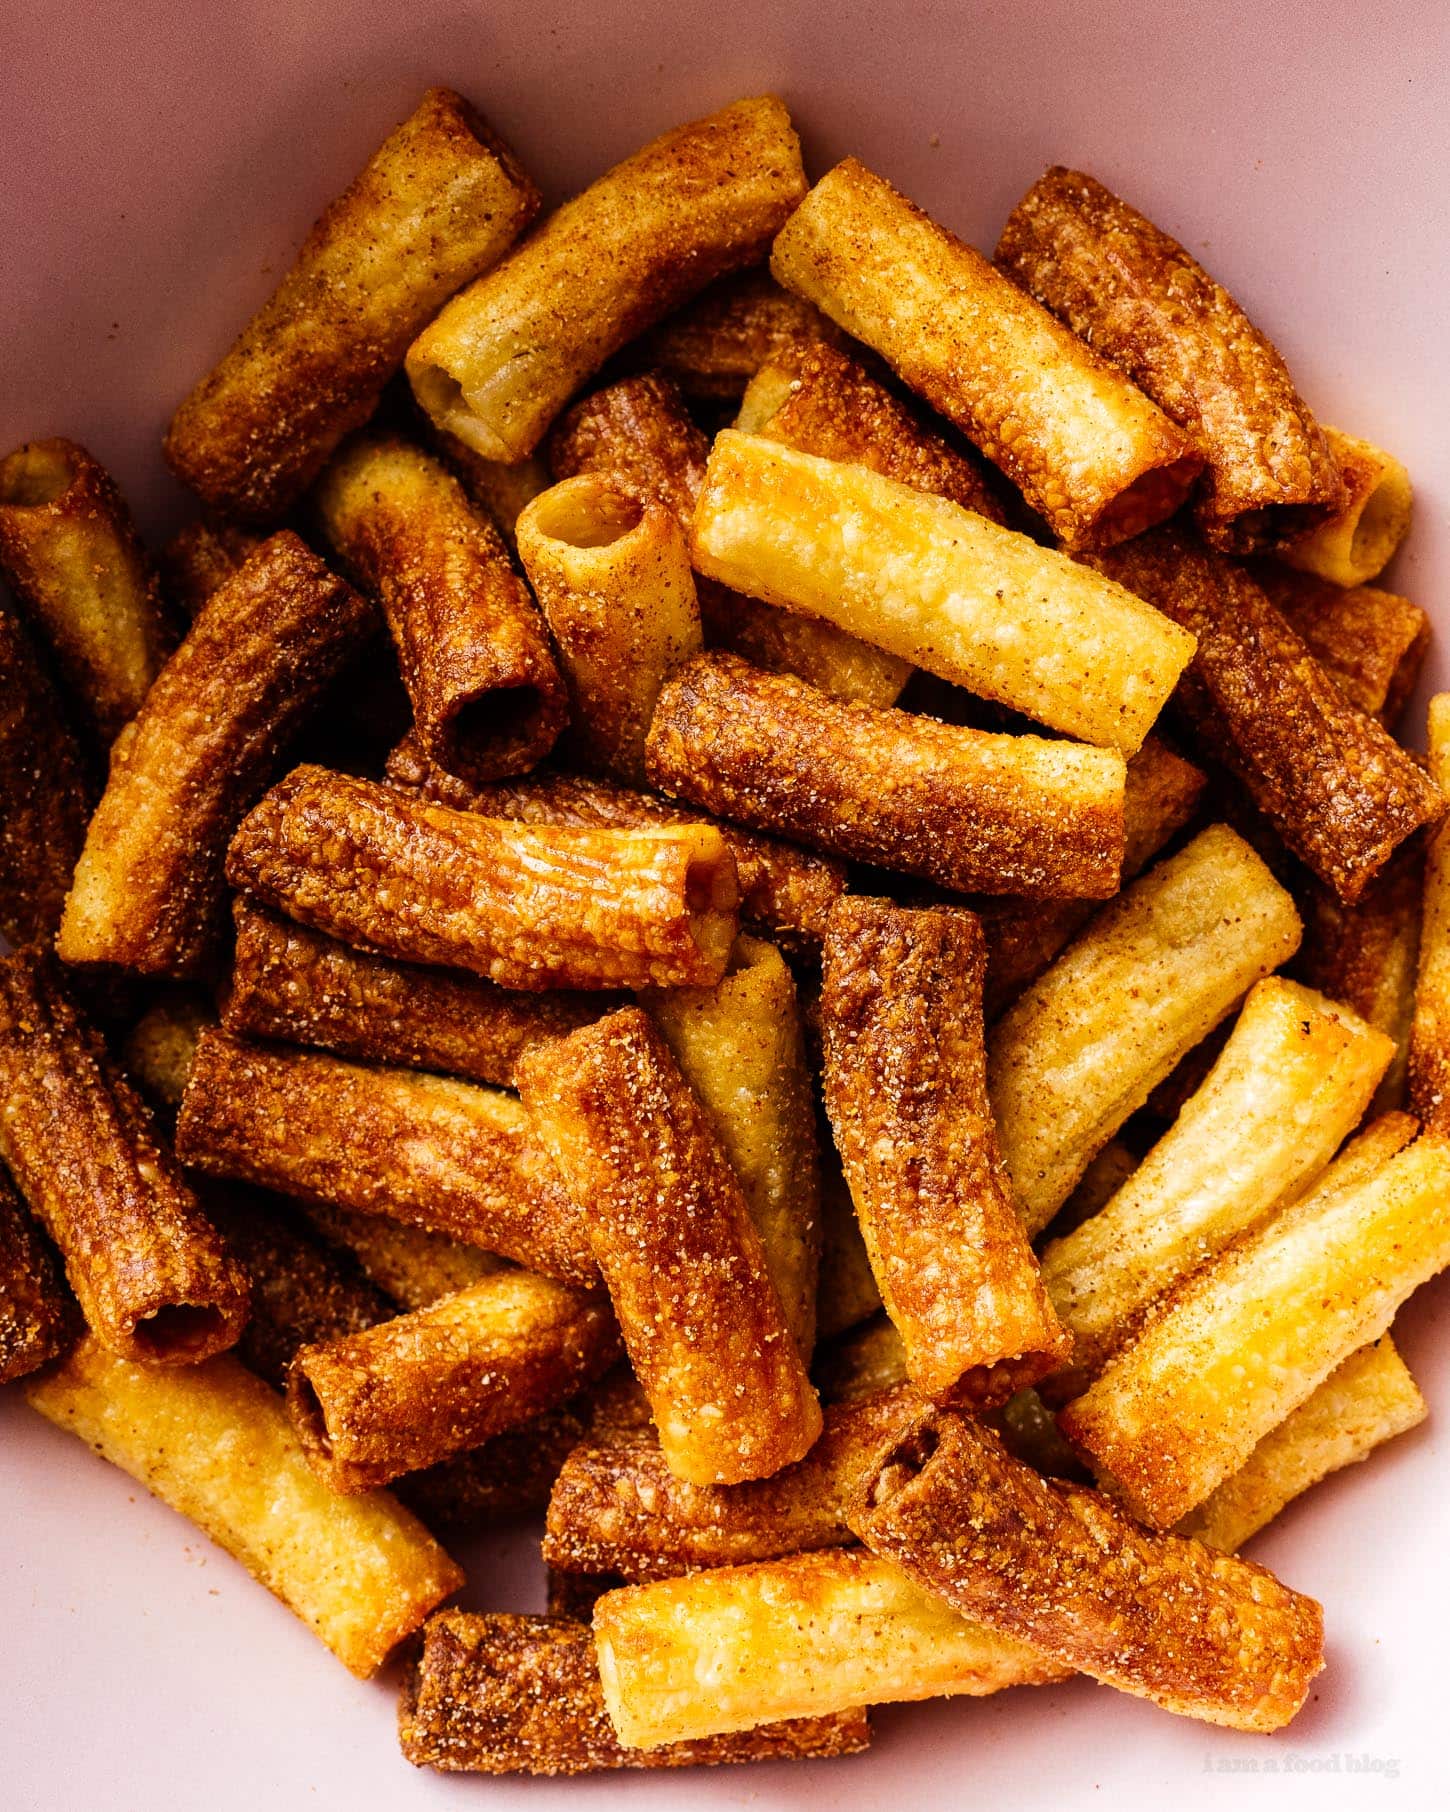 pasta chips tossed in spicy powder | www.iamafoodblog.com